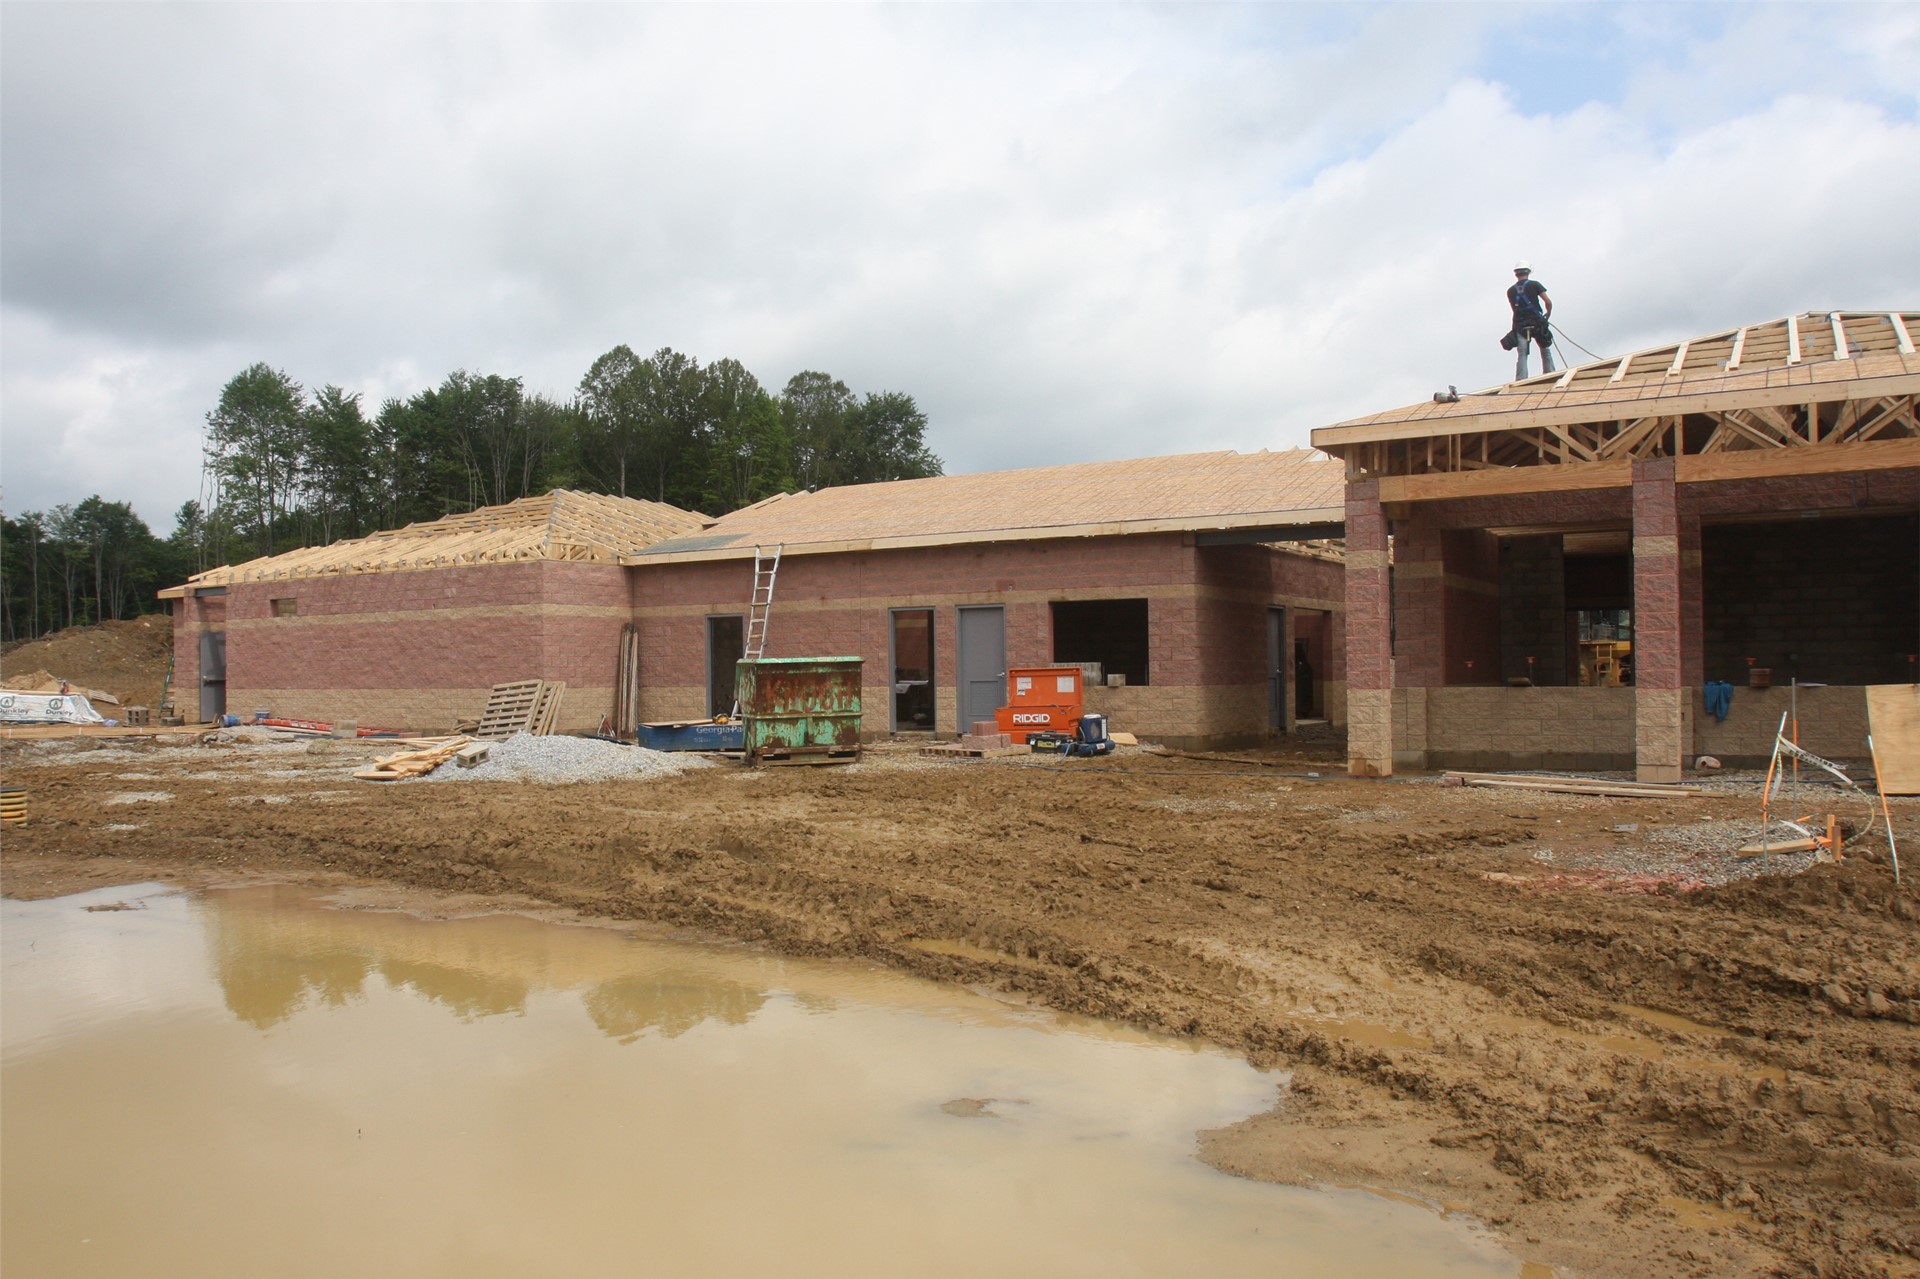 Locker room and restrooms on home side of stadium building (from inside stadium)